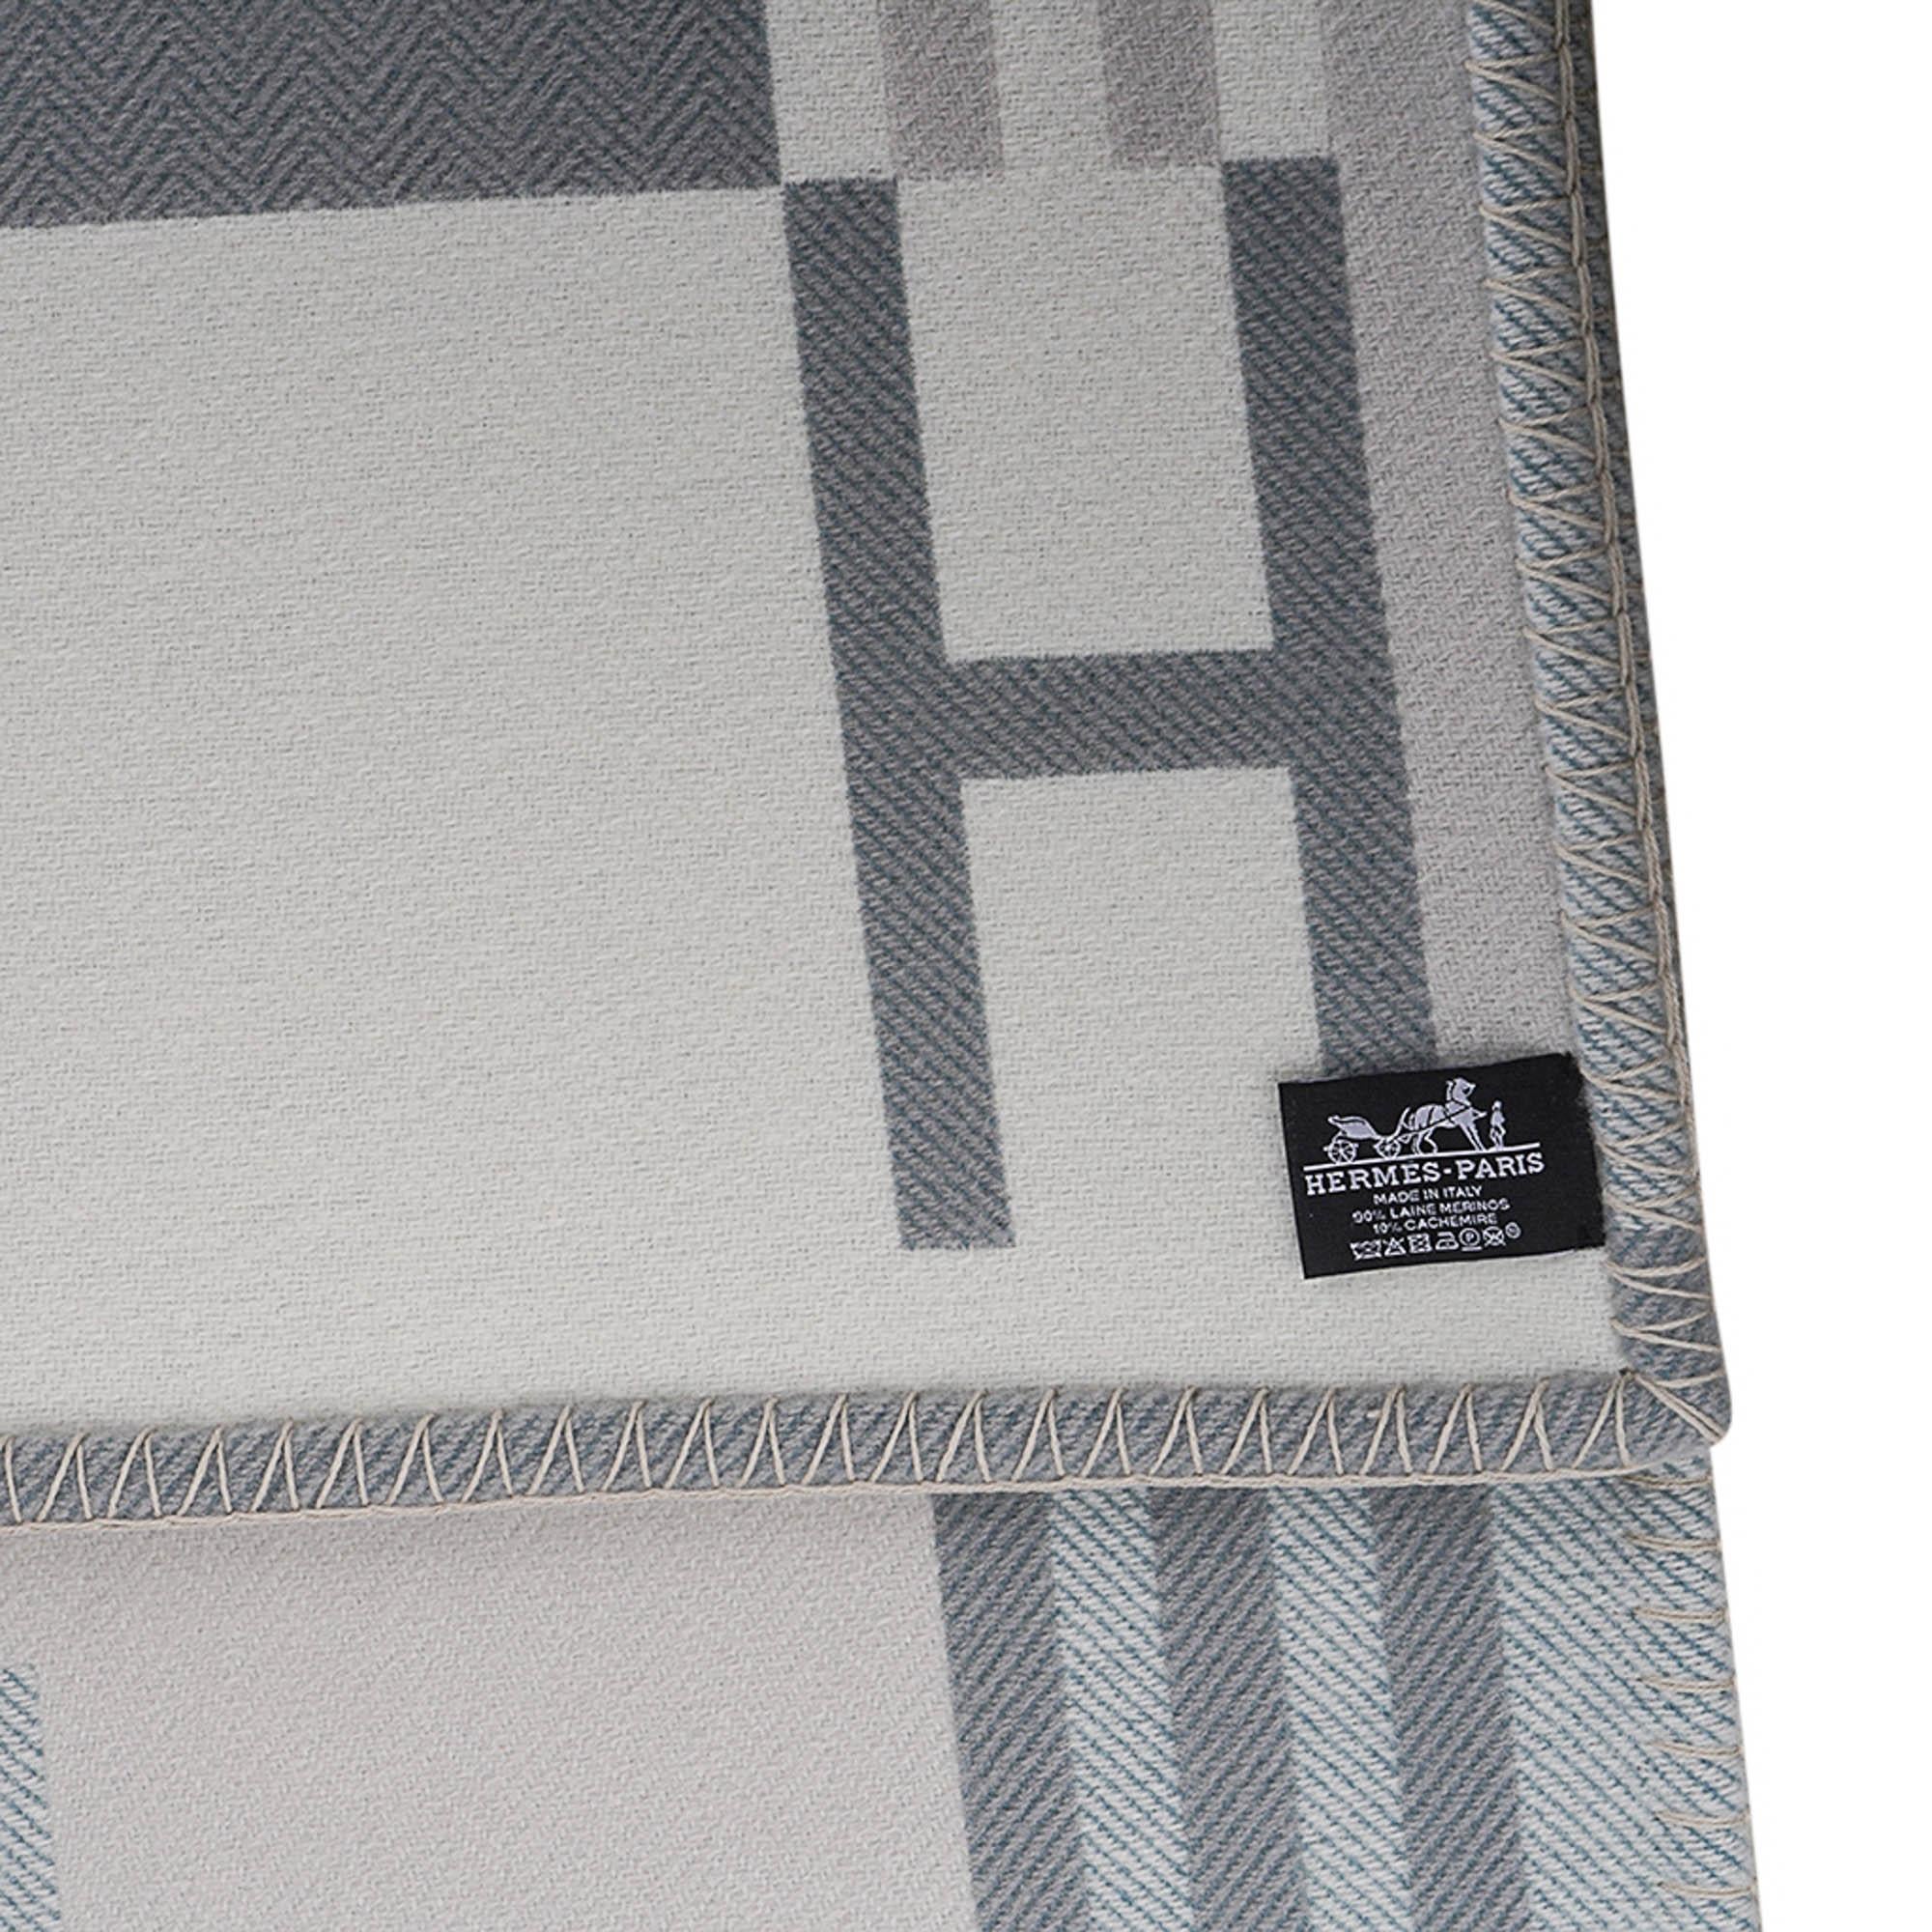 Hermes Ithaque Blanket Gris Perle Wool and Cashmere For Sale 5